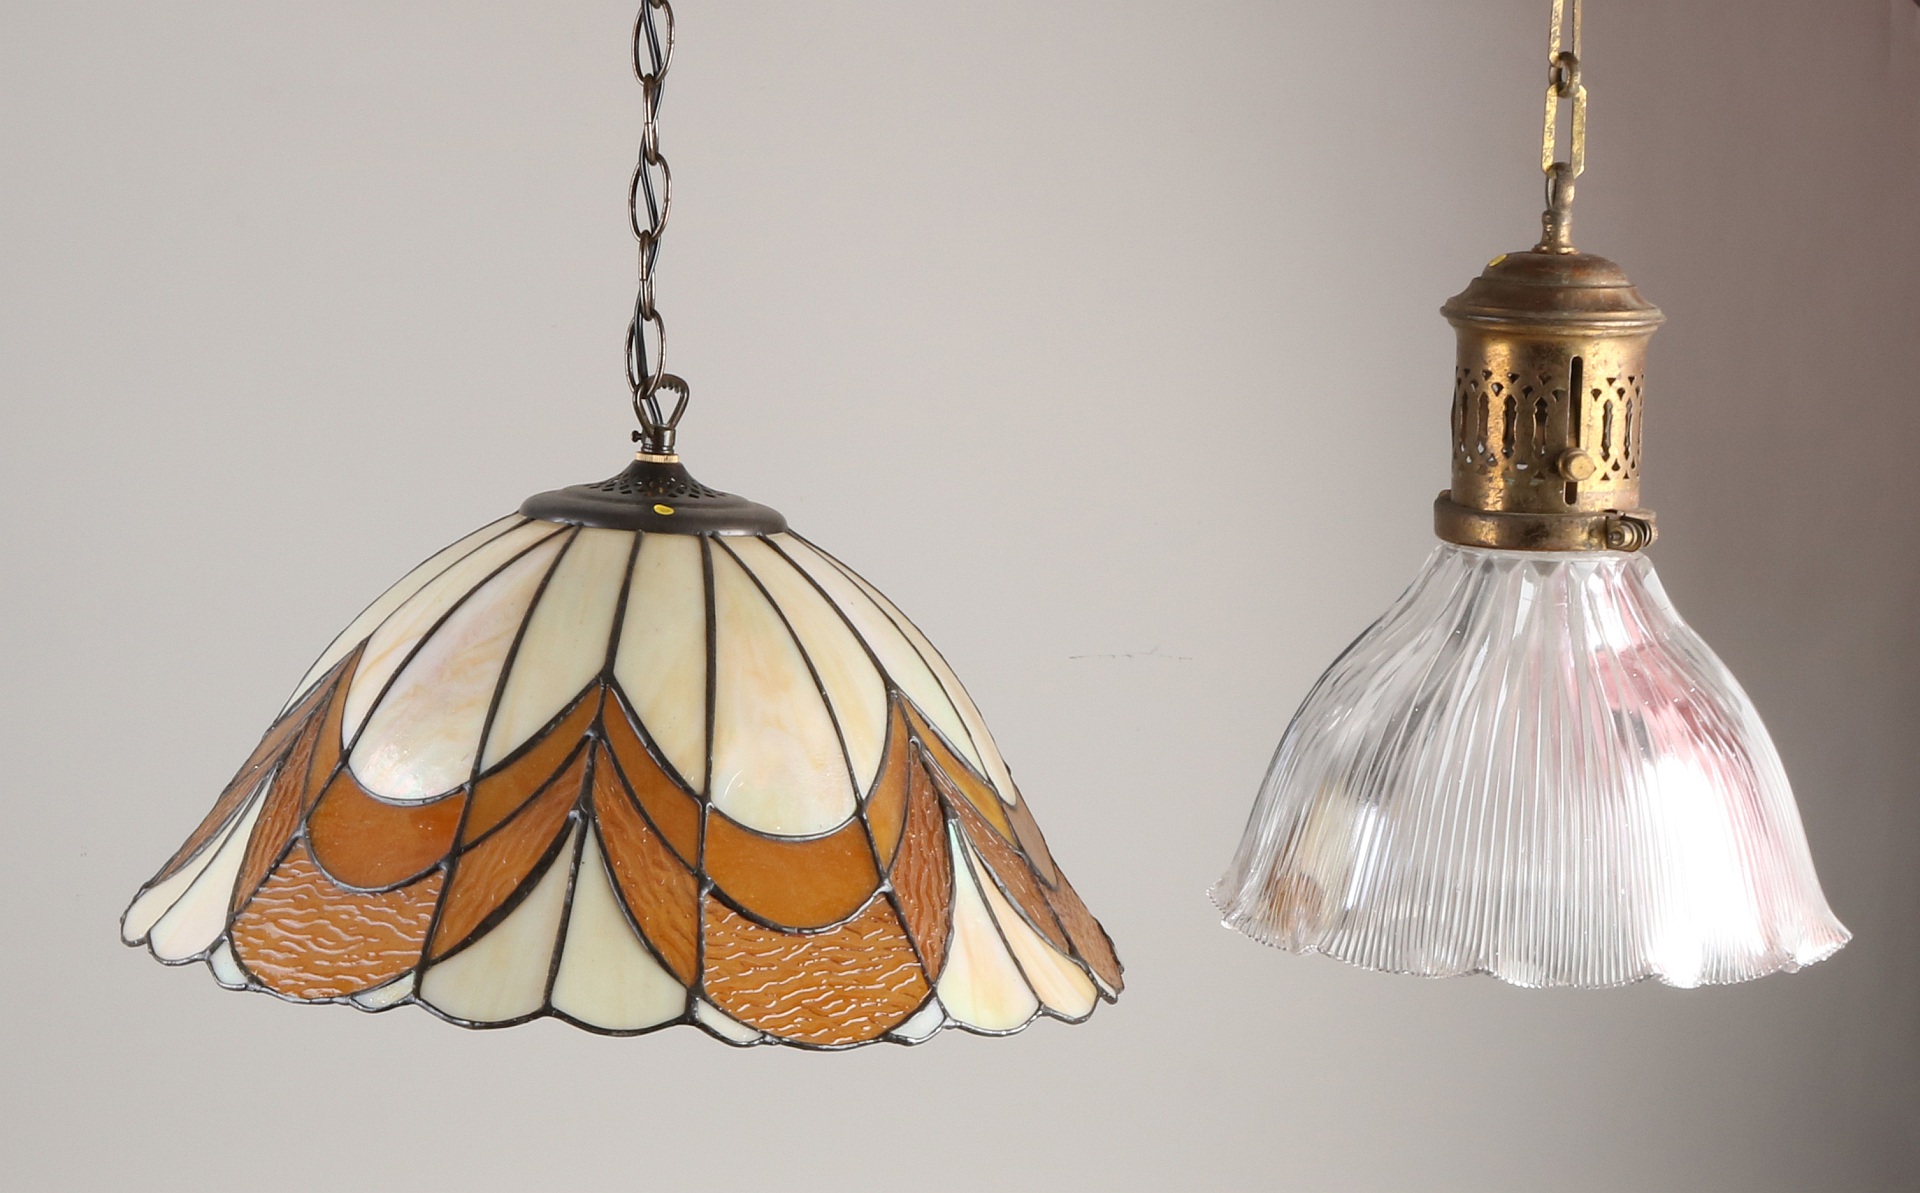 Two pendant lamps